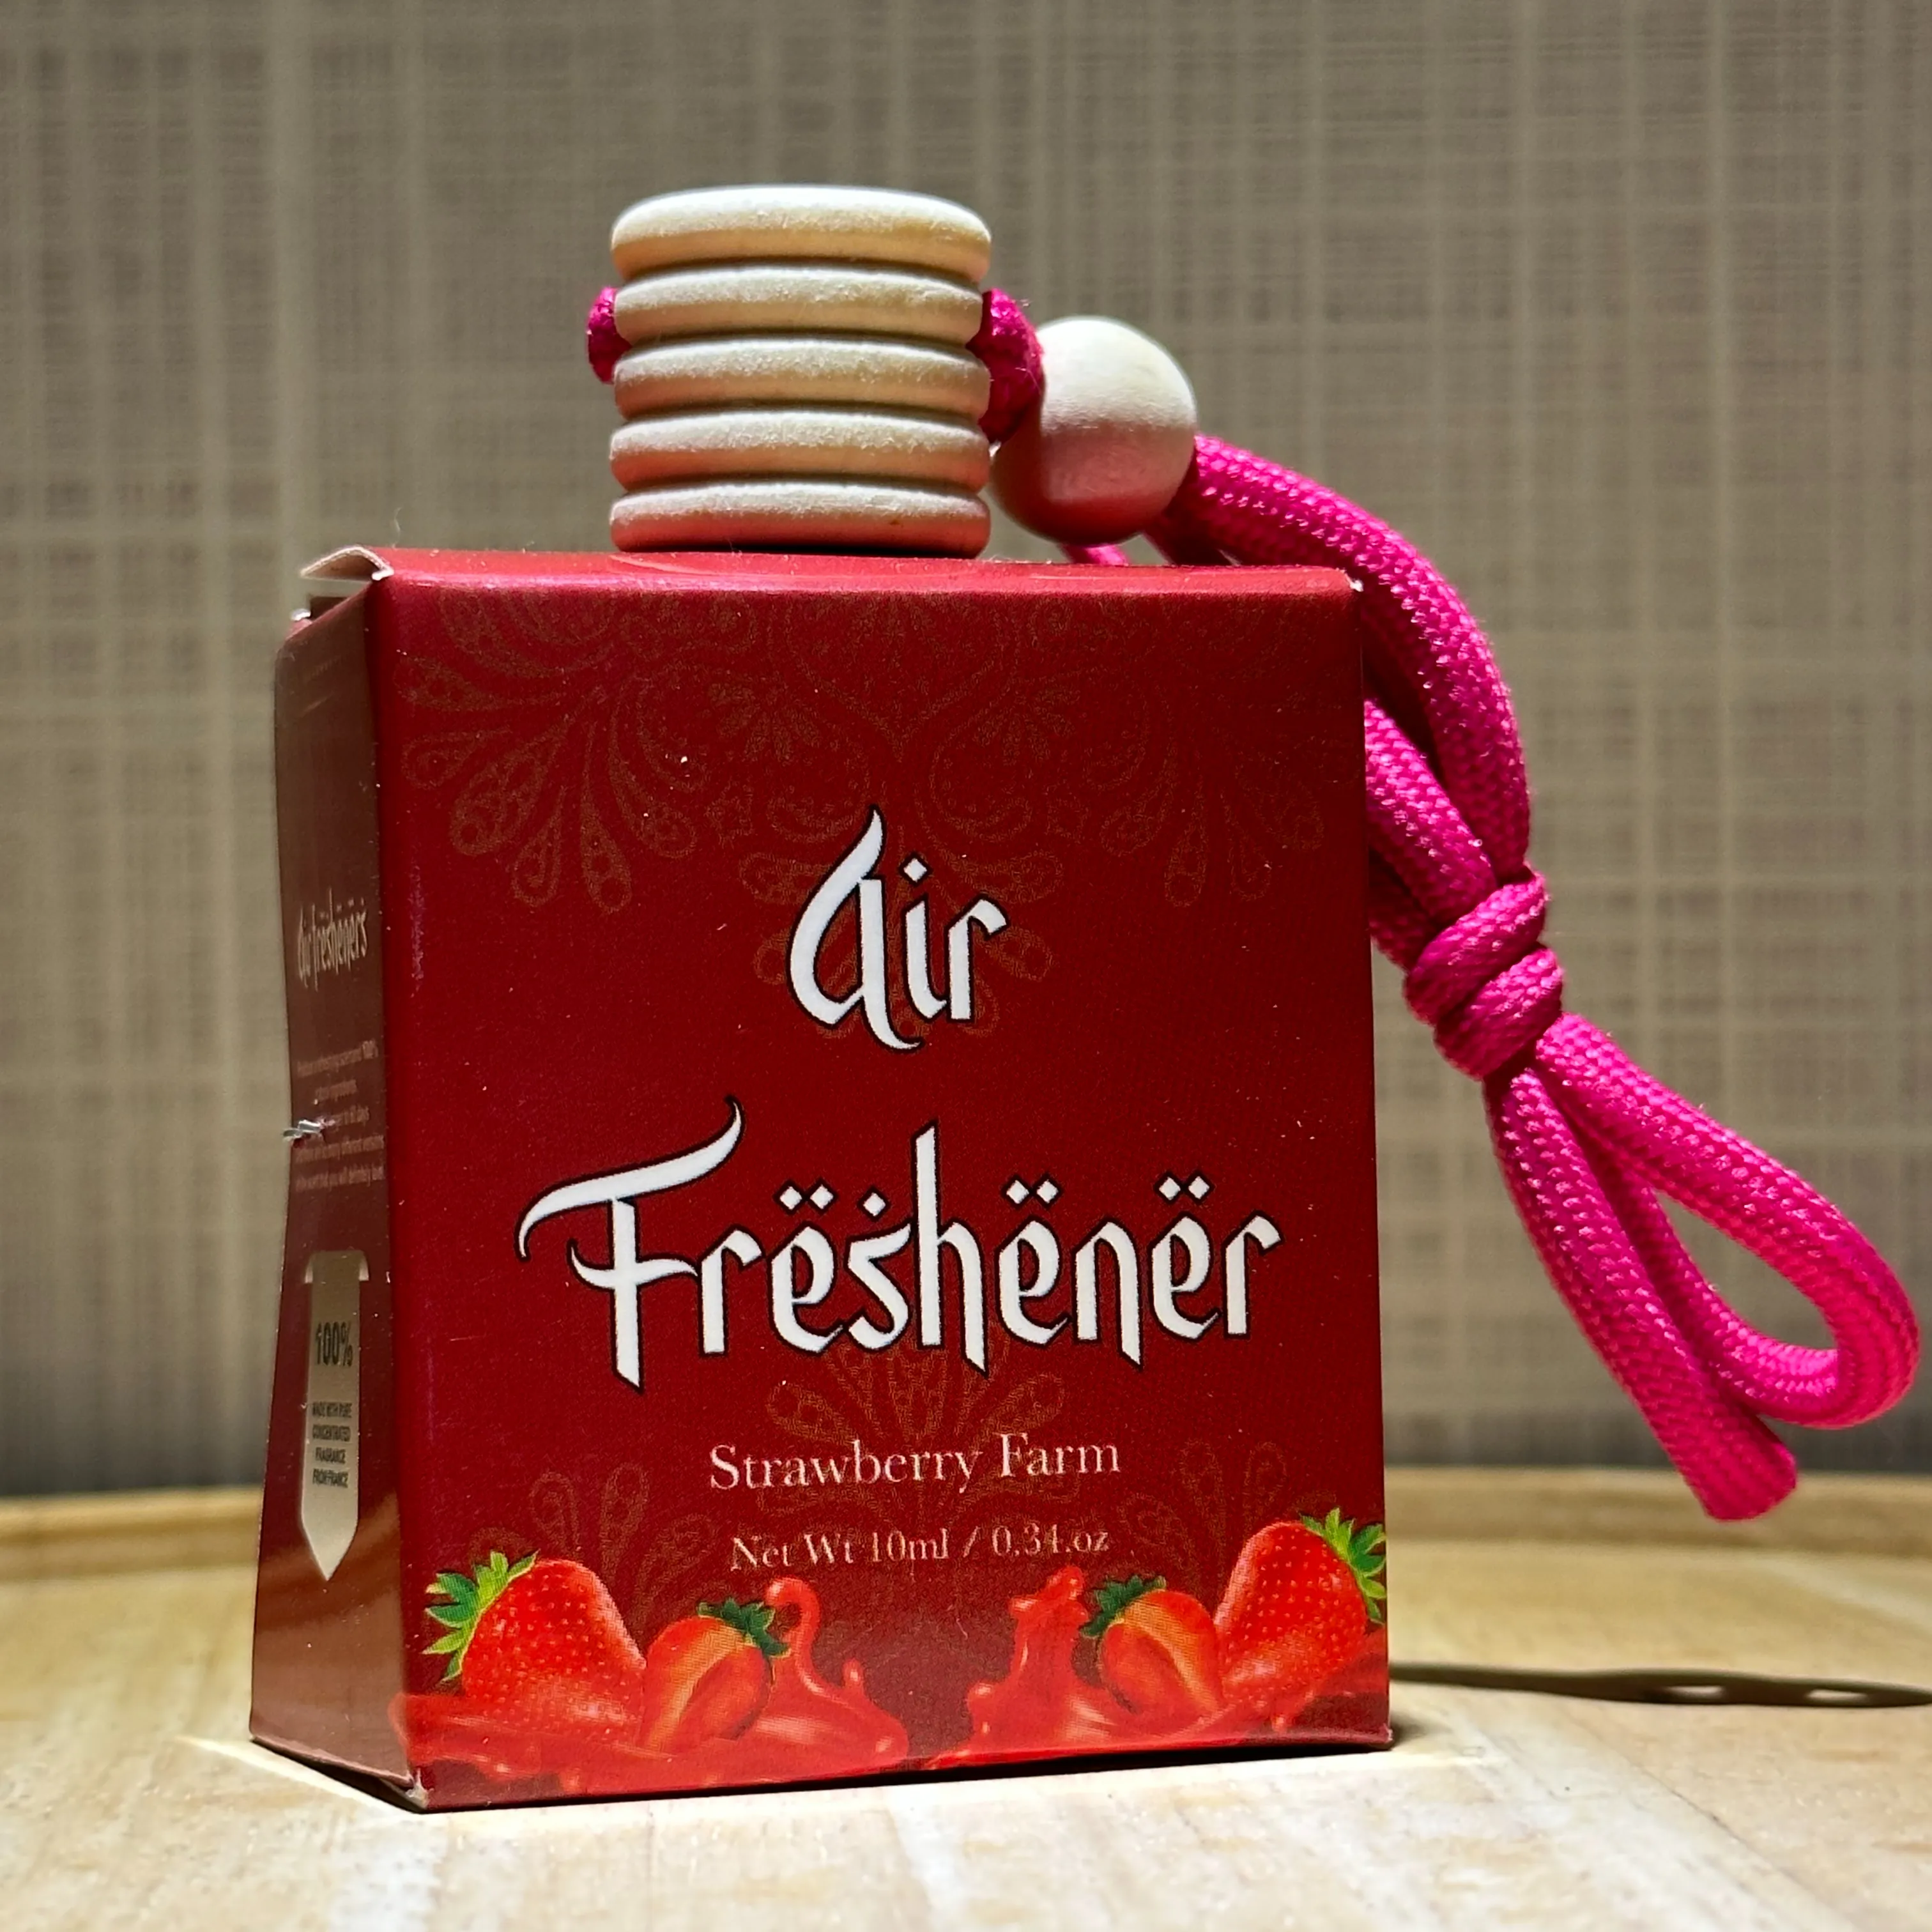 Car Air Fresheners Bottles Convenient Use Scent Long Lasting Fruity 10ml Strawberry Farm Malaysia Up To 45 Days